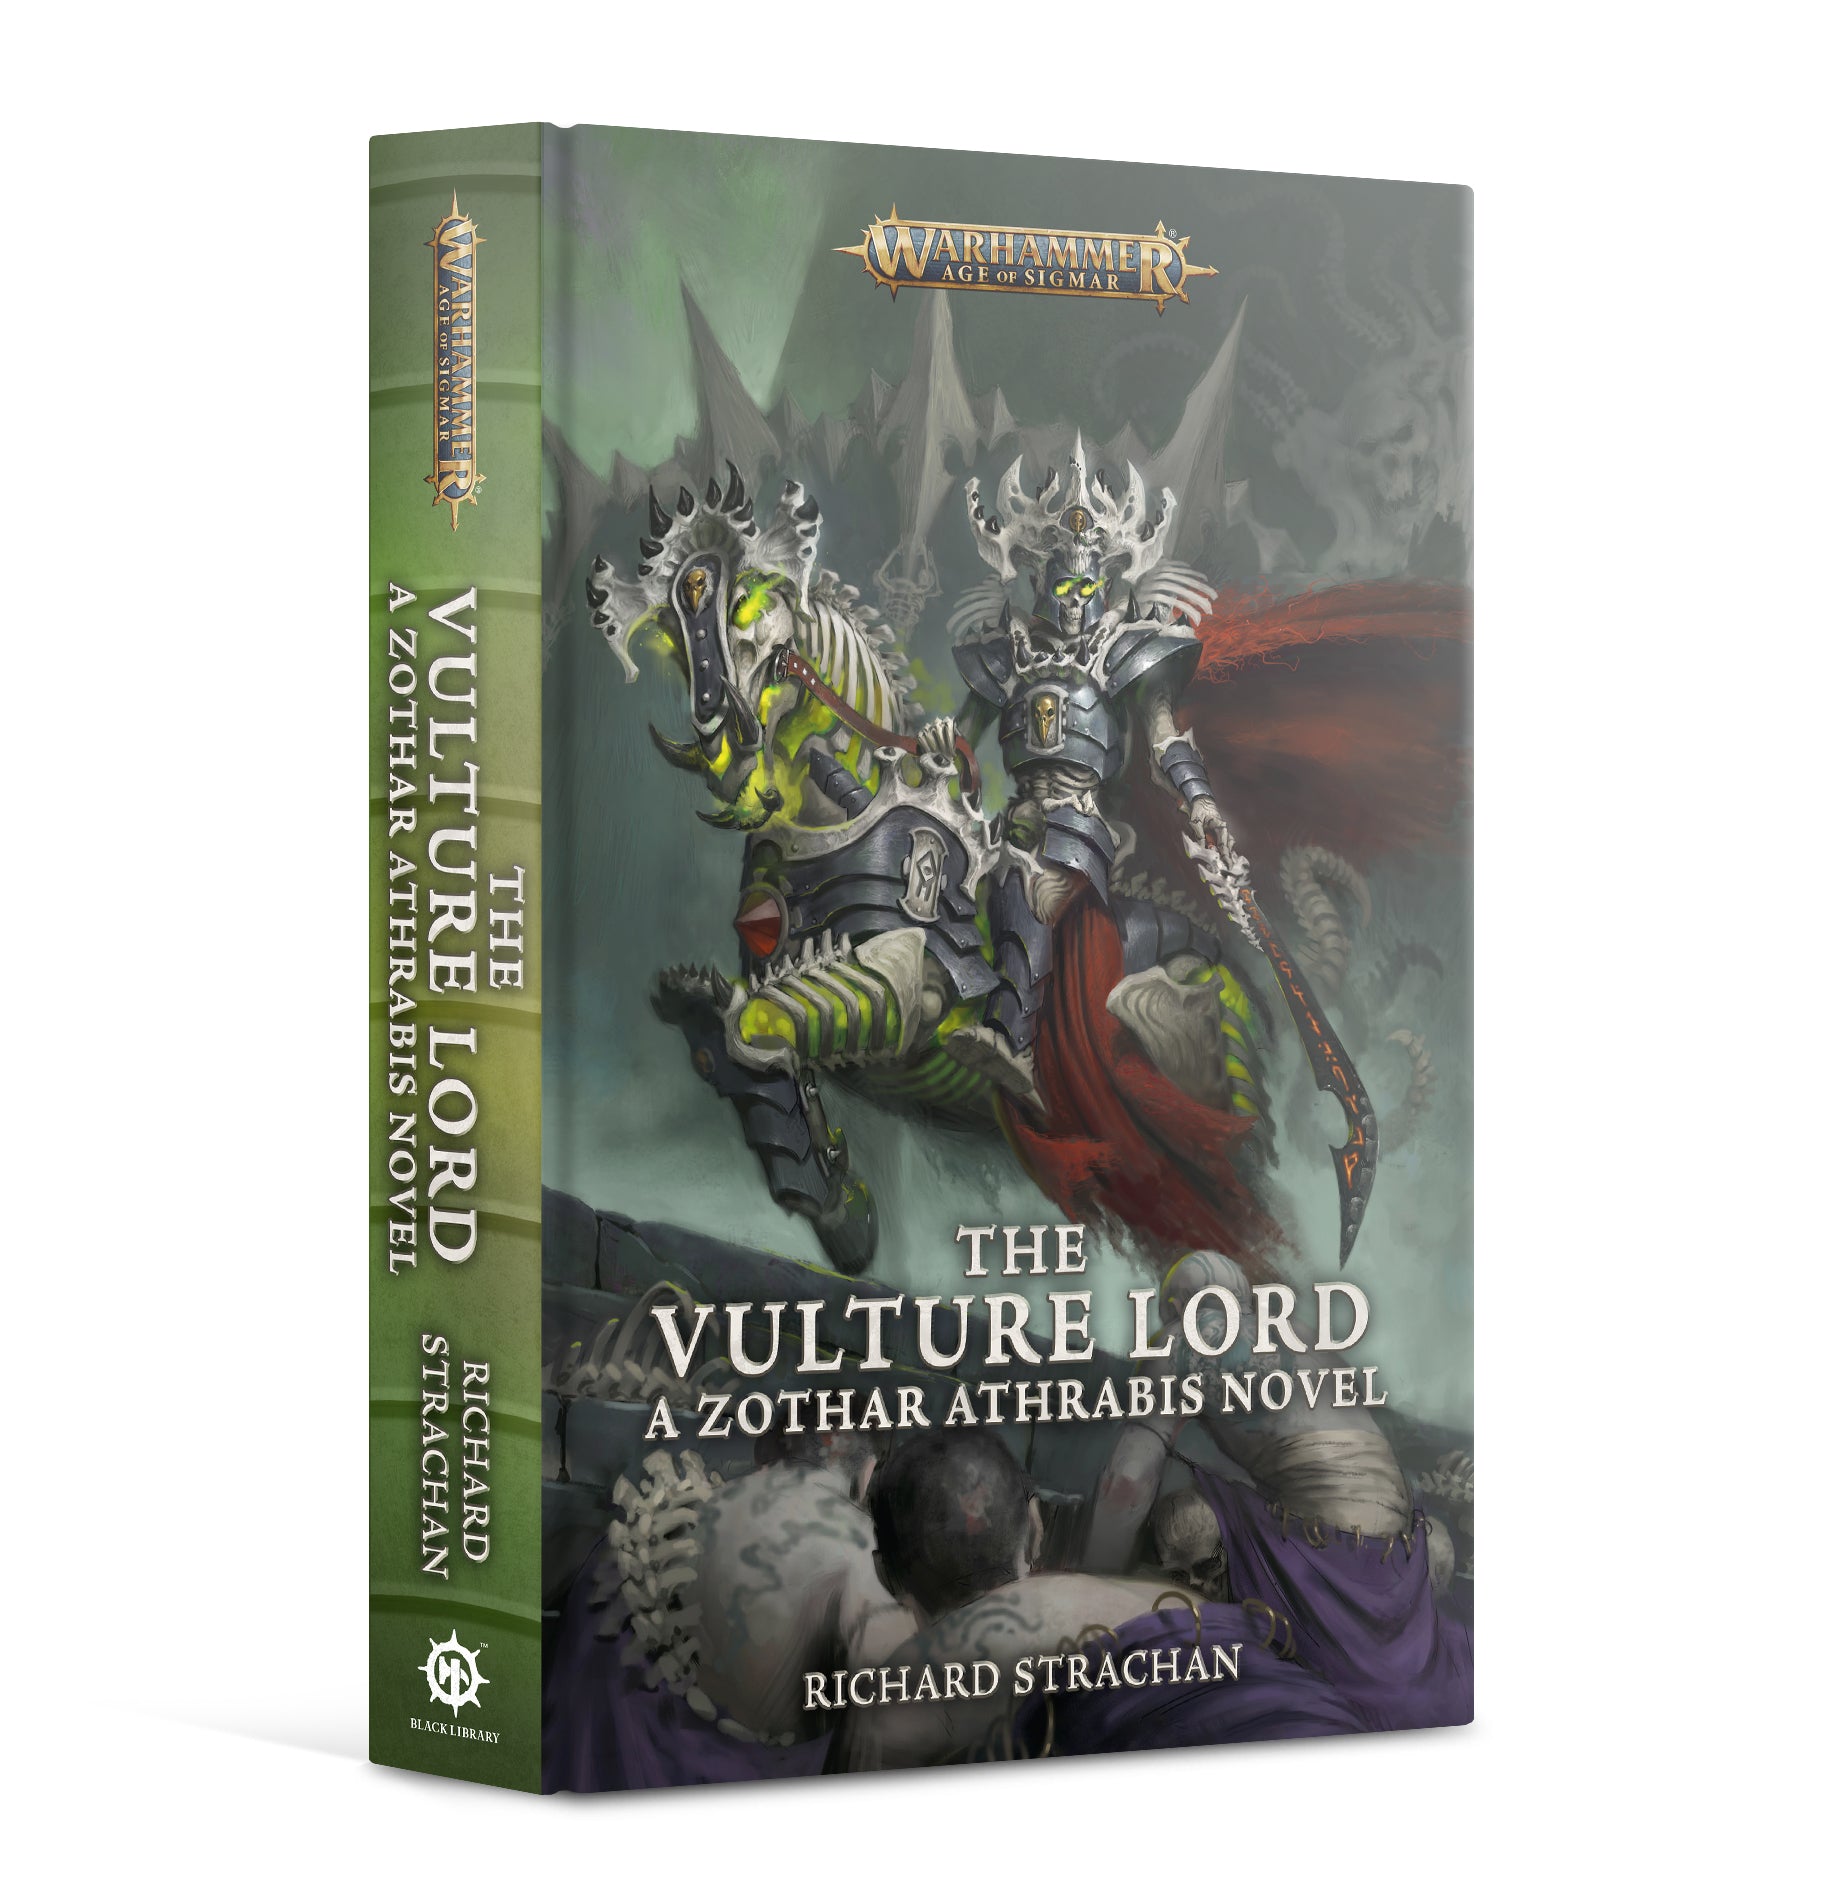 Warhammer Age of Sigmar: The Vulture Lord HB